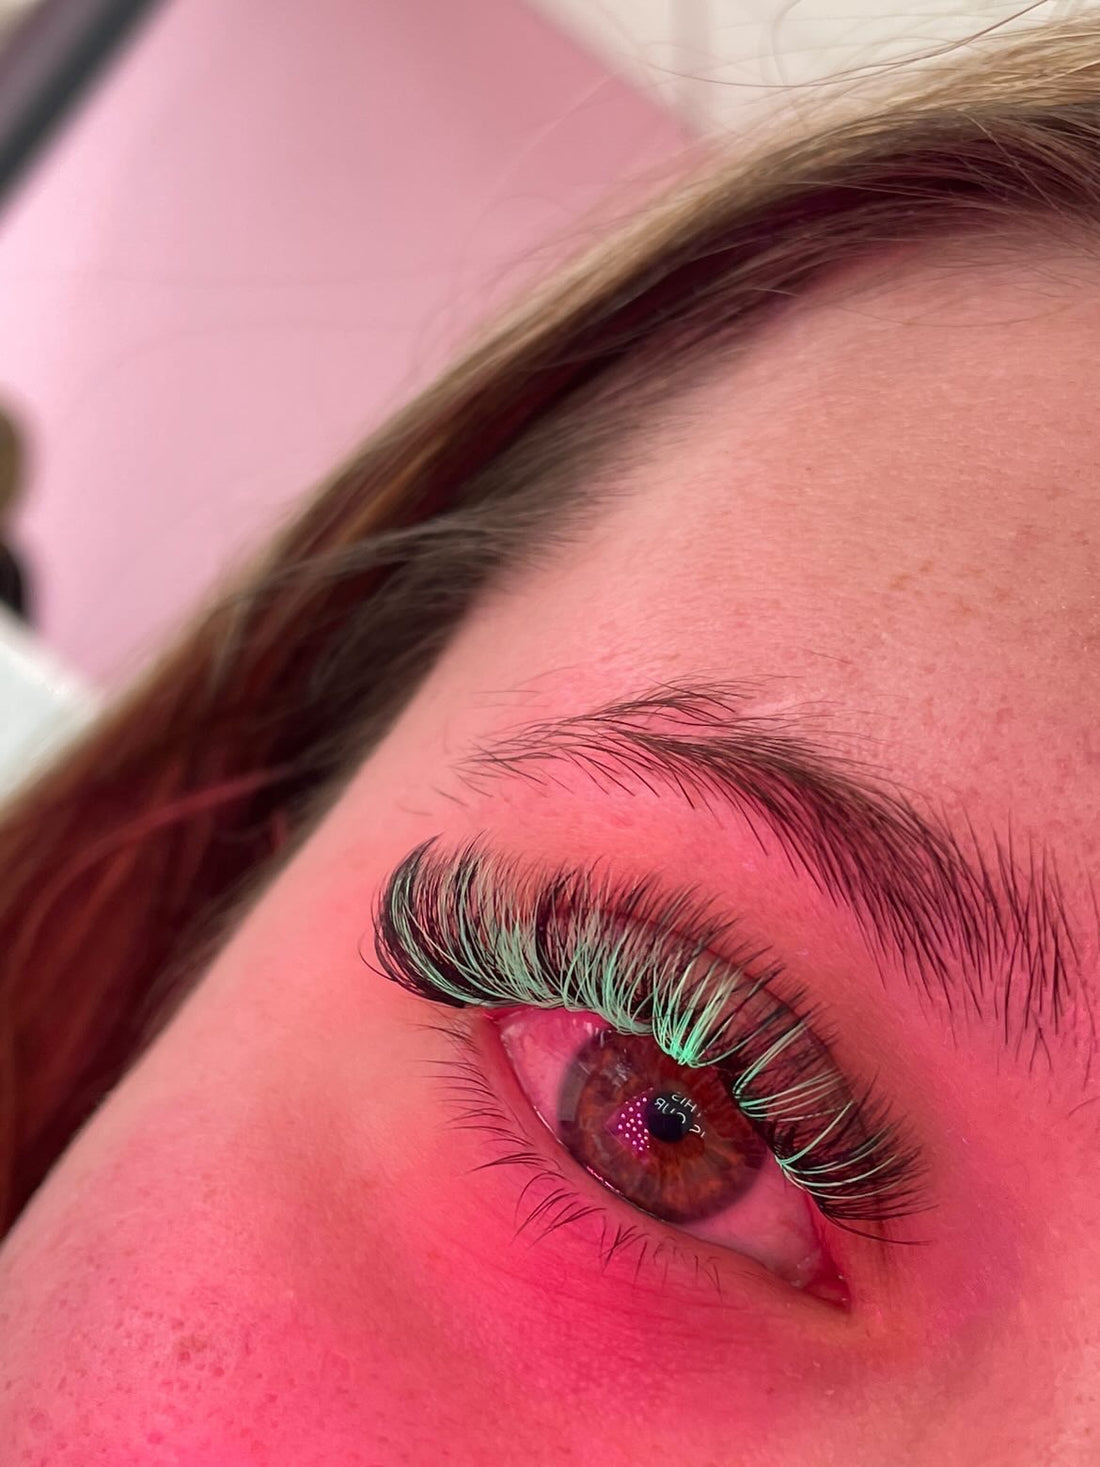 Green glow in the dark uv Russian volume lashes lash extensions